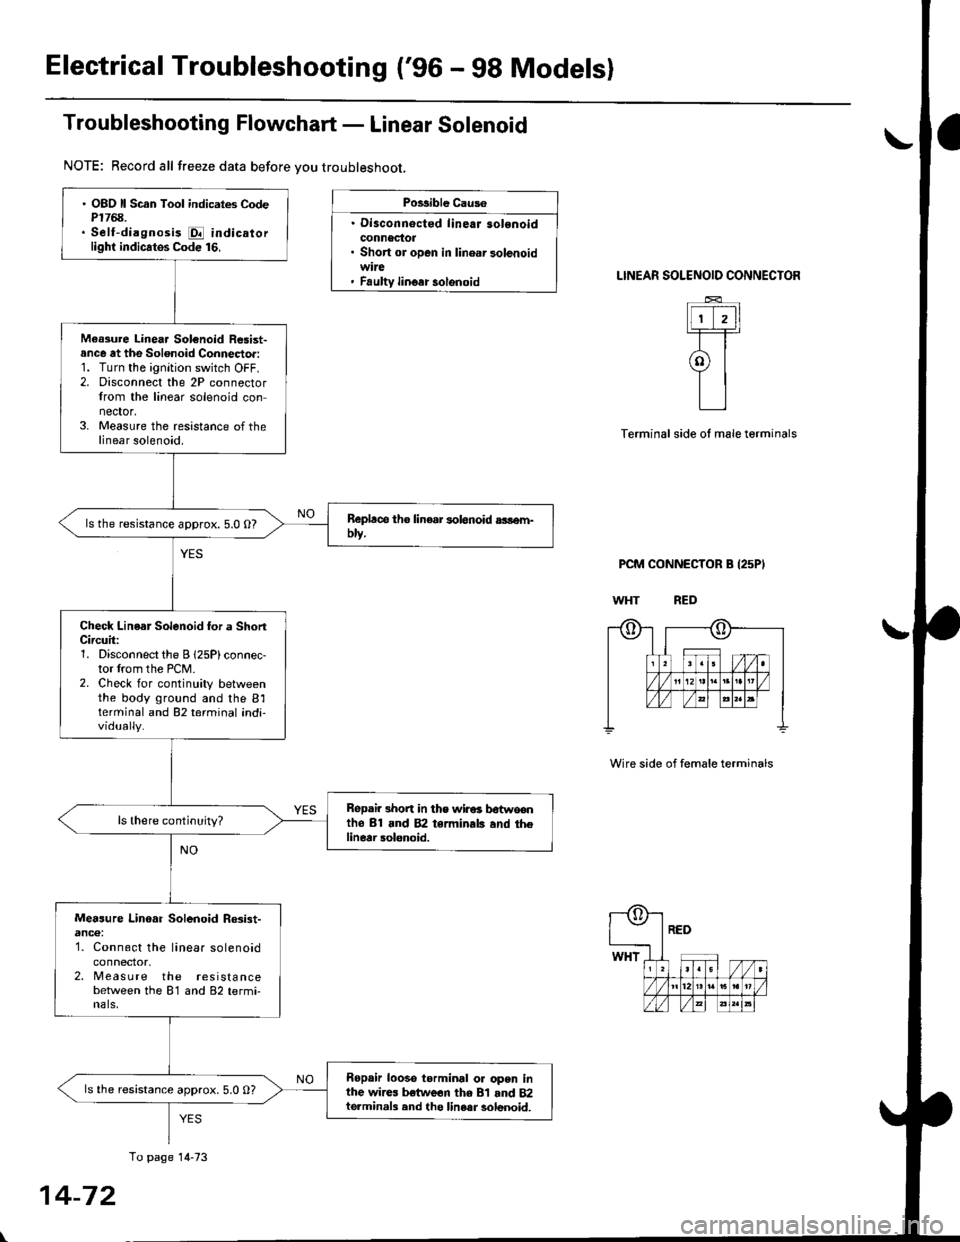 HONDA CIVIC 1998 6.G User Guide Electrical Troubleshooting (96 - 98 Modelsl
Troubleshooting Flowchart - Linear Solenoid
NOTE: Record all freeze data before vou troubleshoot,
Po$ible Caus6
. Disconnoctod lineaJ solonoidconnectot. Sh